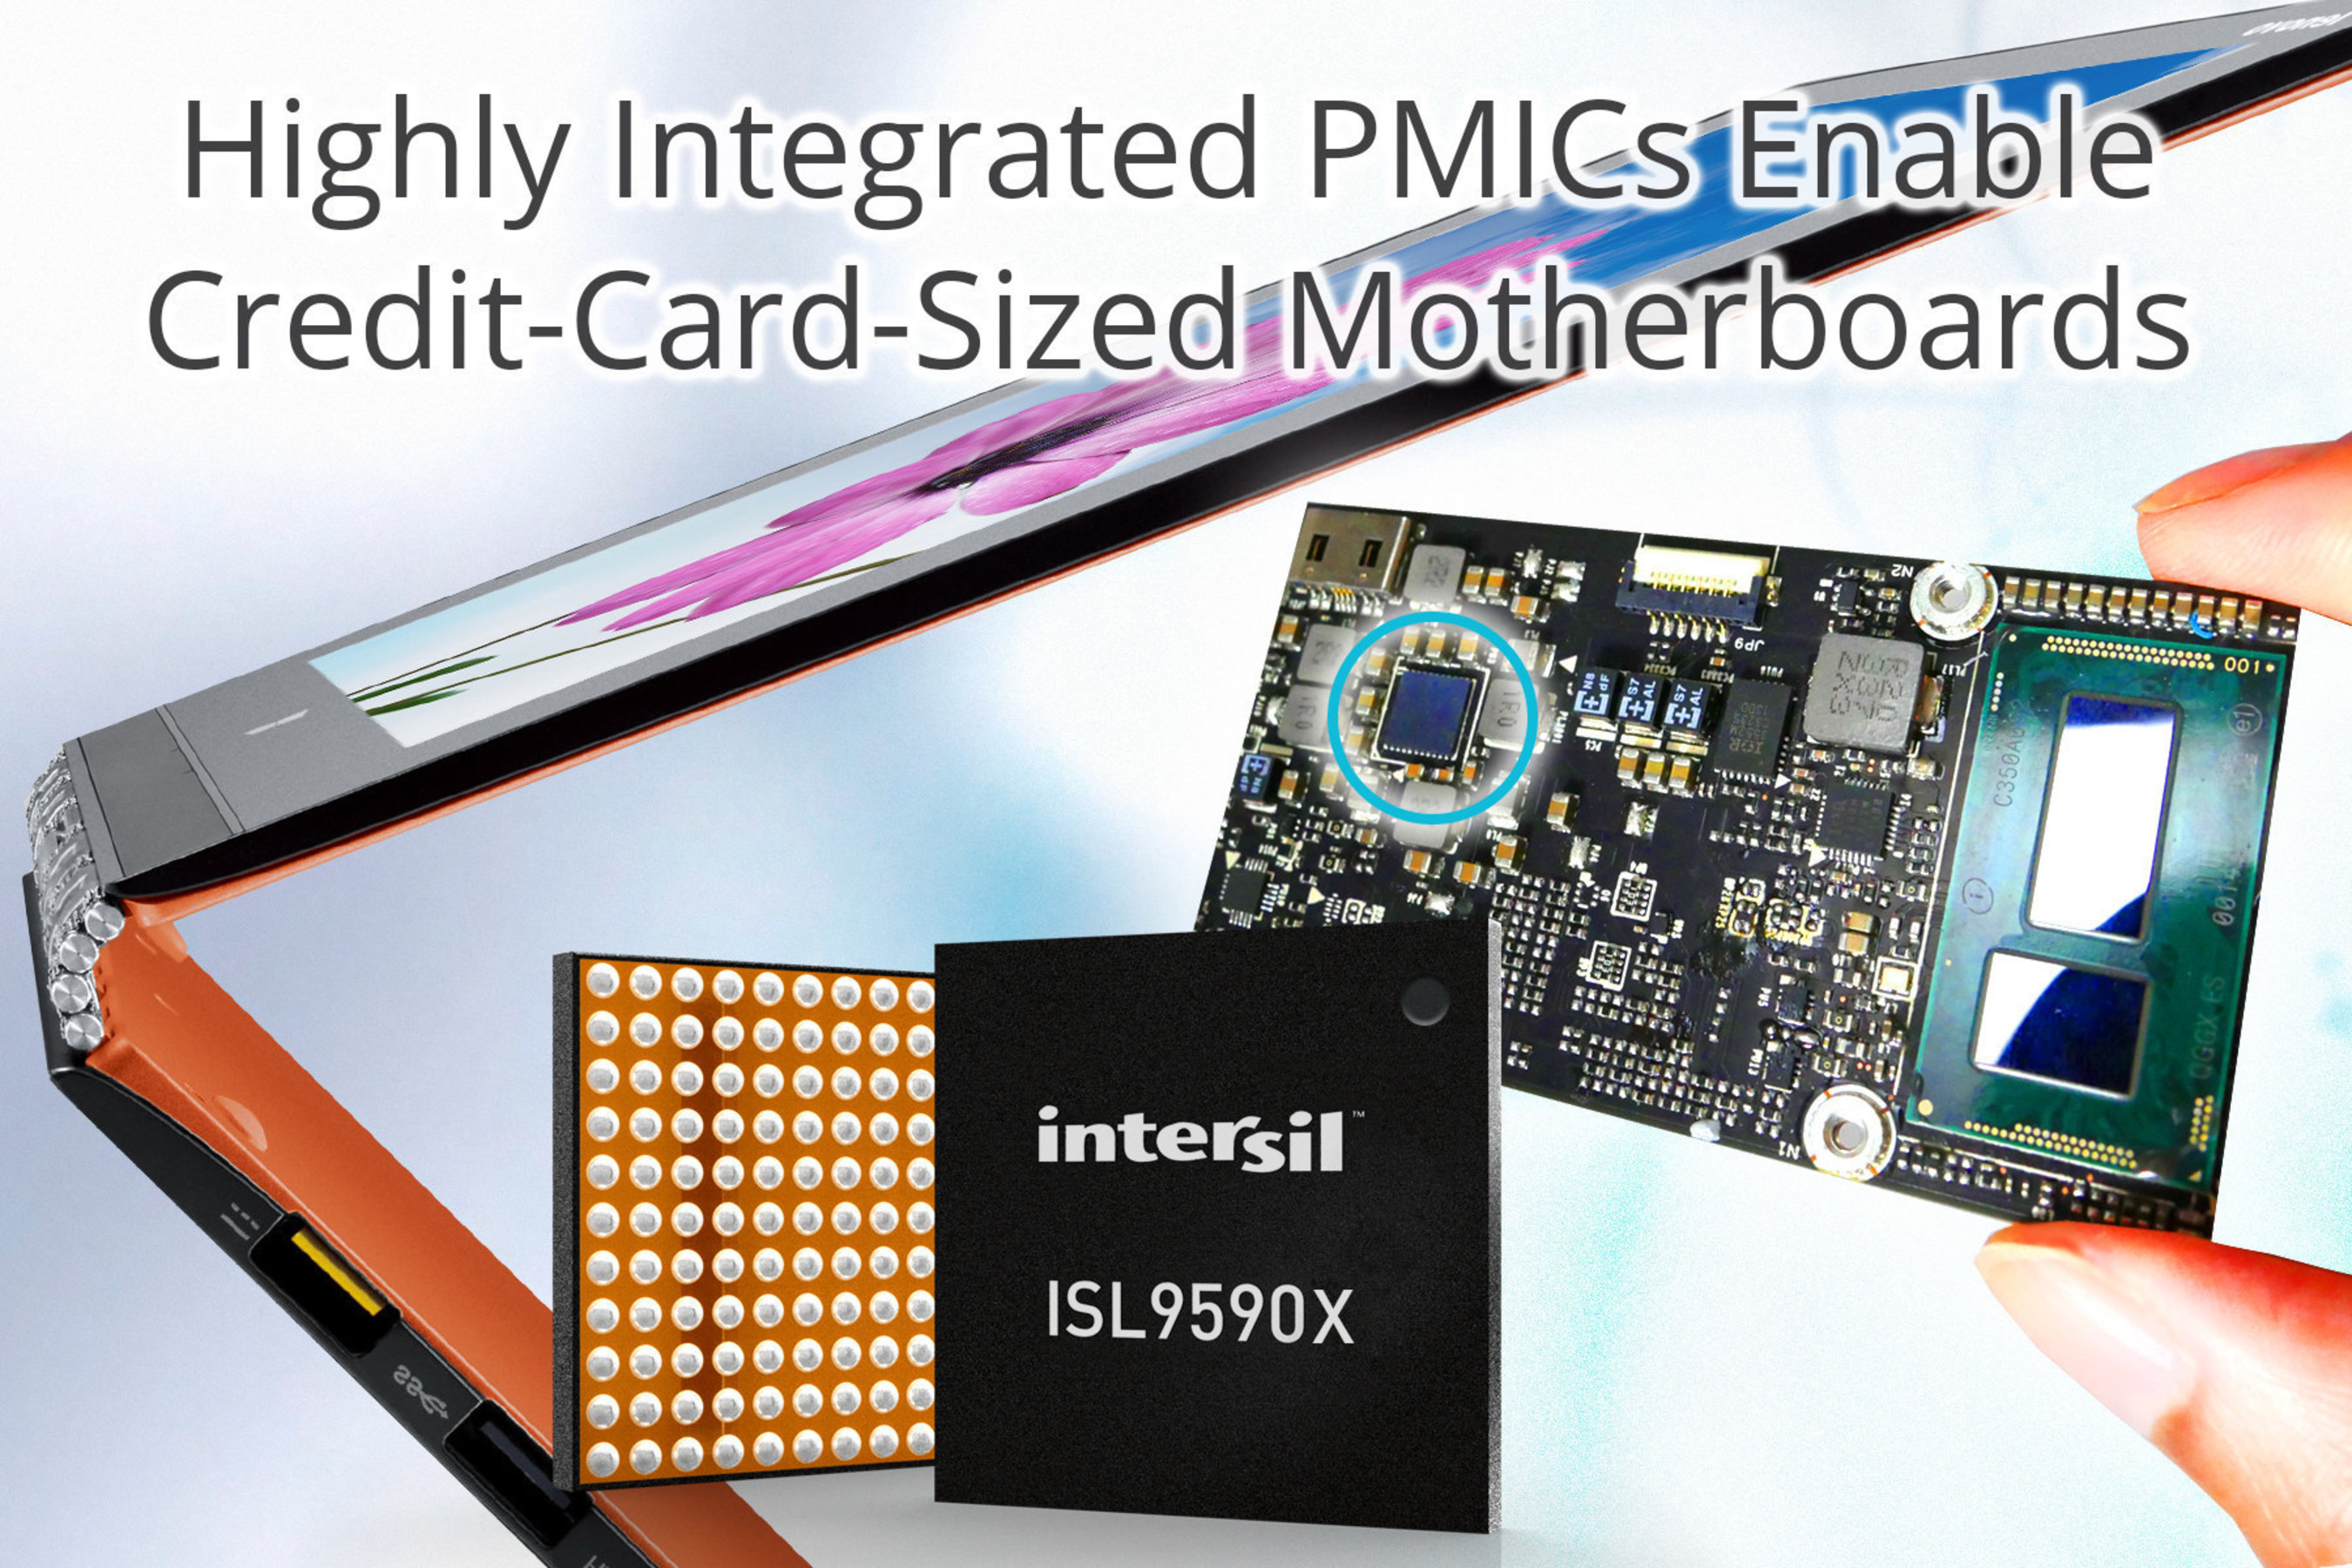 ISL9590x PMIC solutions shrink board space by 75%, enable first credit card-size motherboards